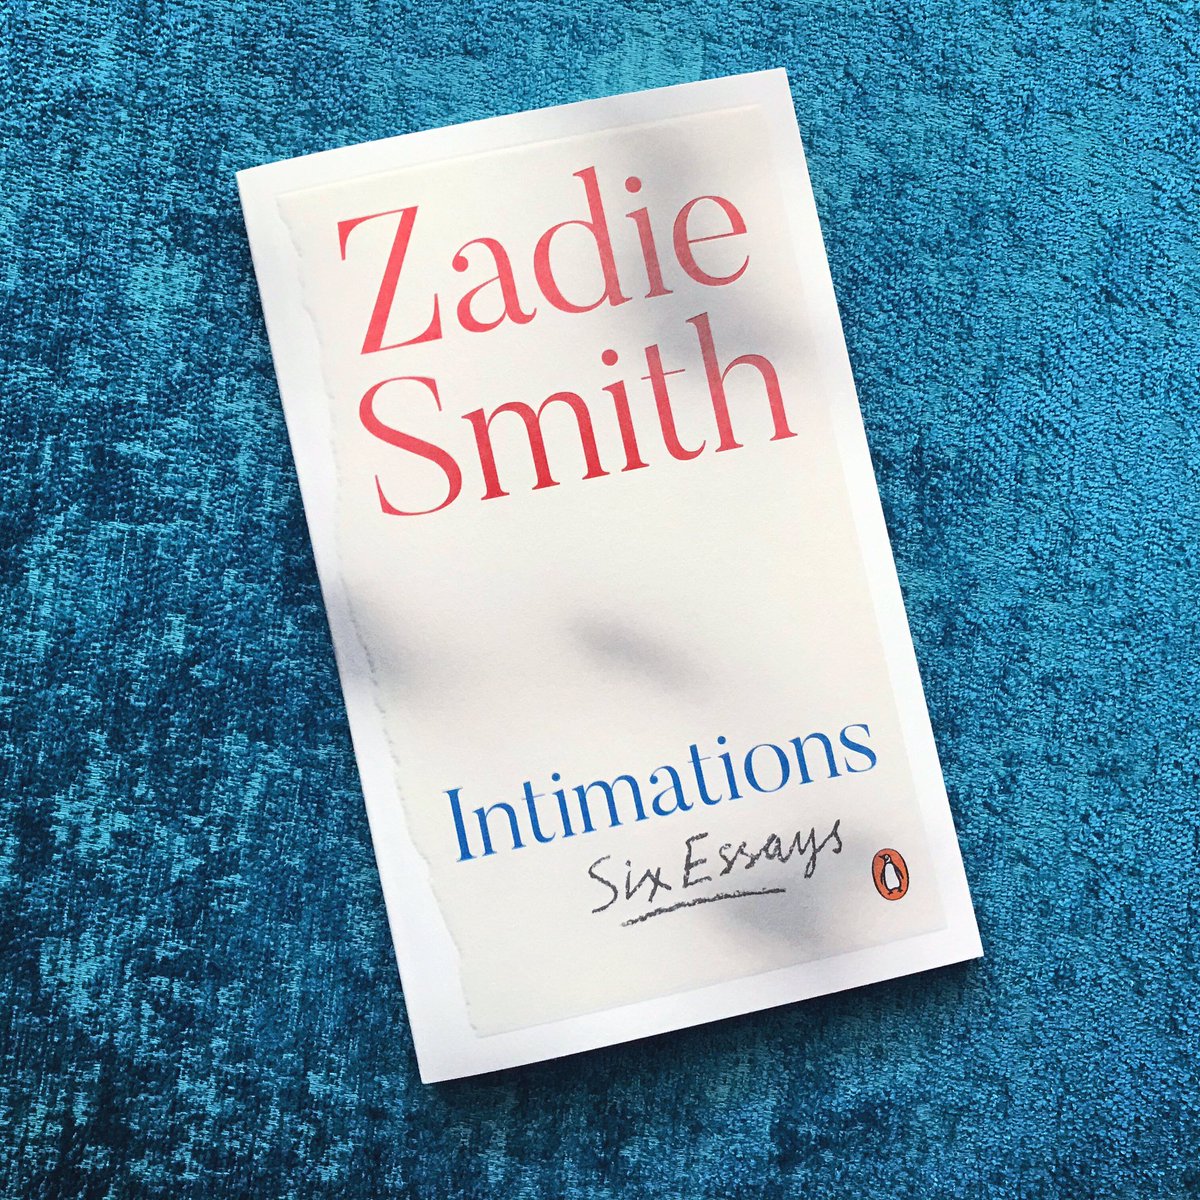 I sat down and inhaled Intimations in a single sitting. Zadie Smith is a tremendous essayist, and this little book was a joy to read.